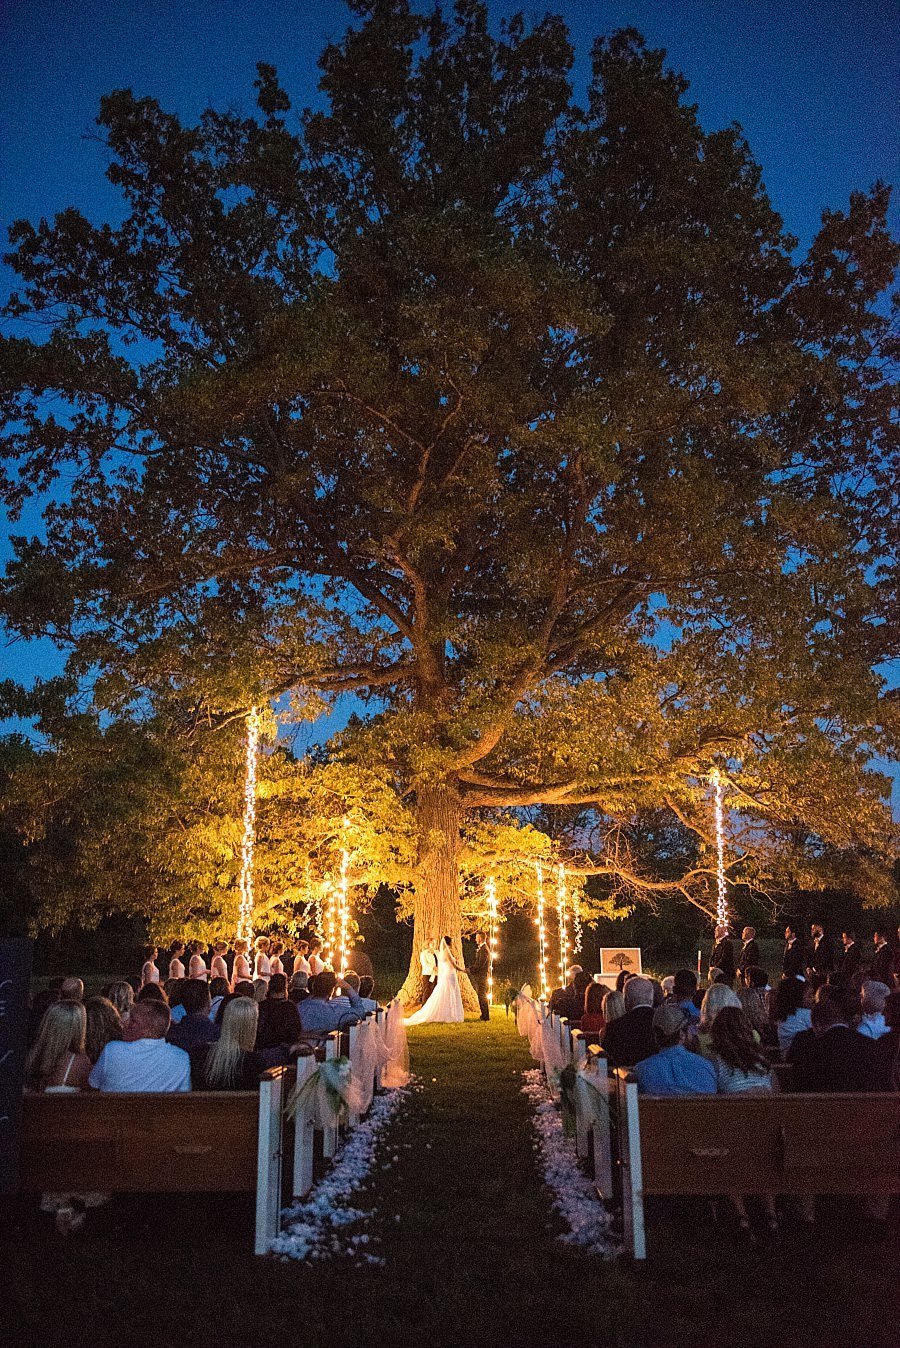 Night ceremony under a large historic tree with lights hanging from the limbs